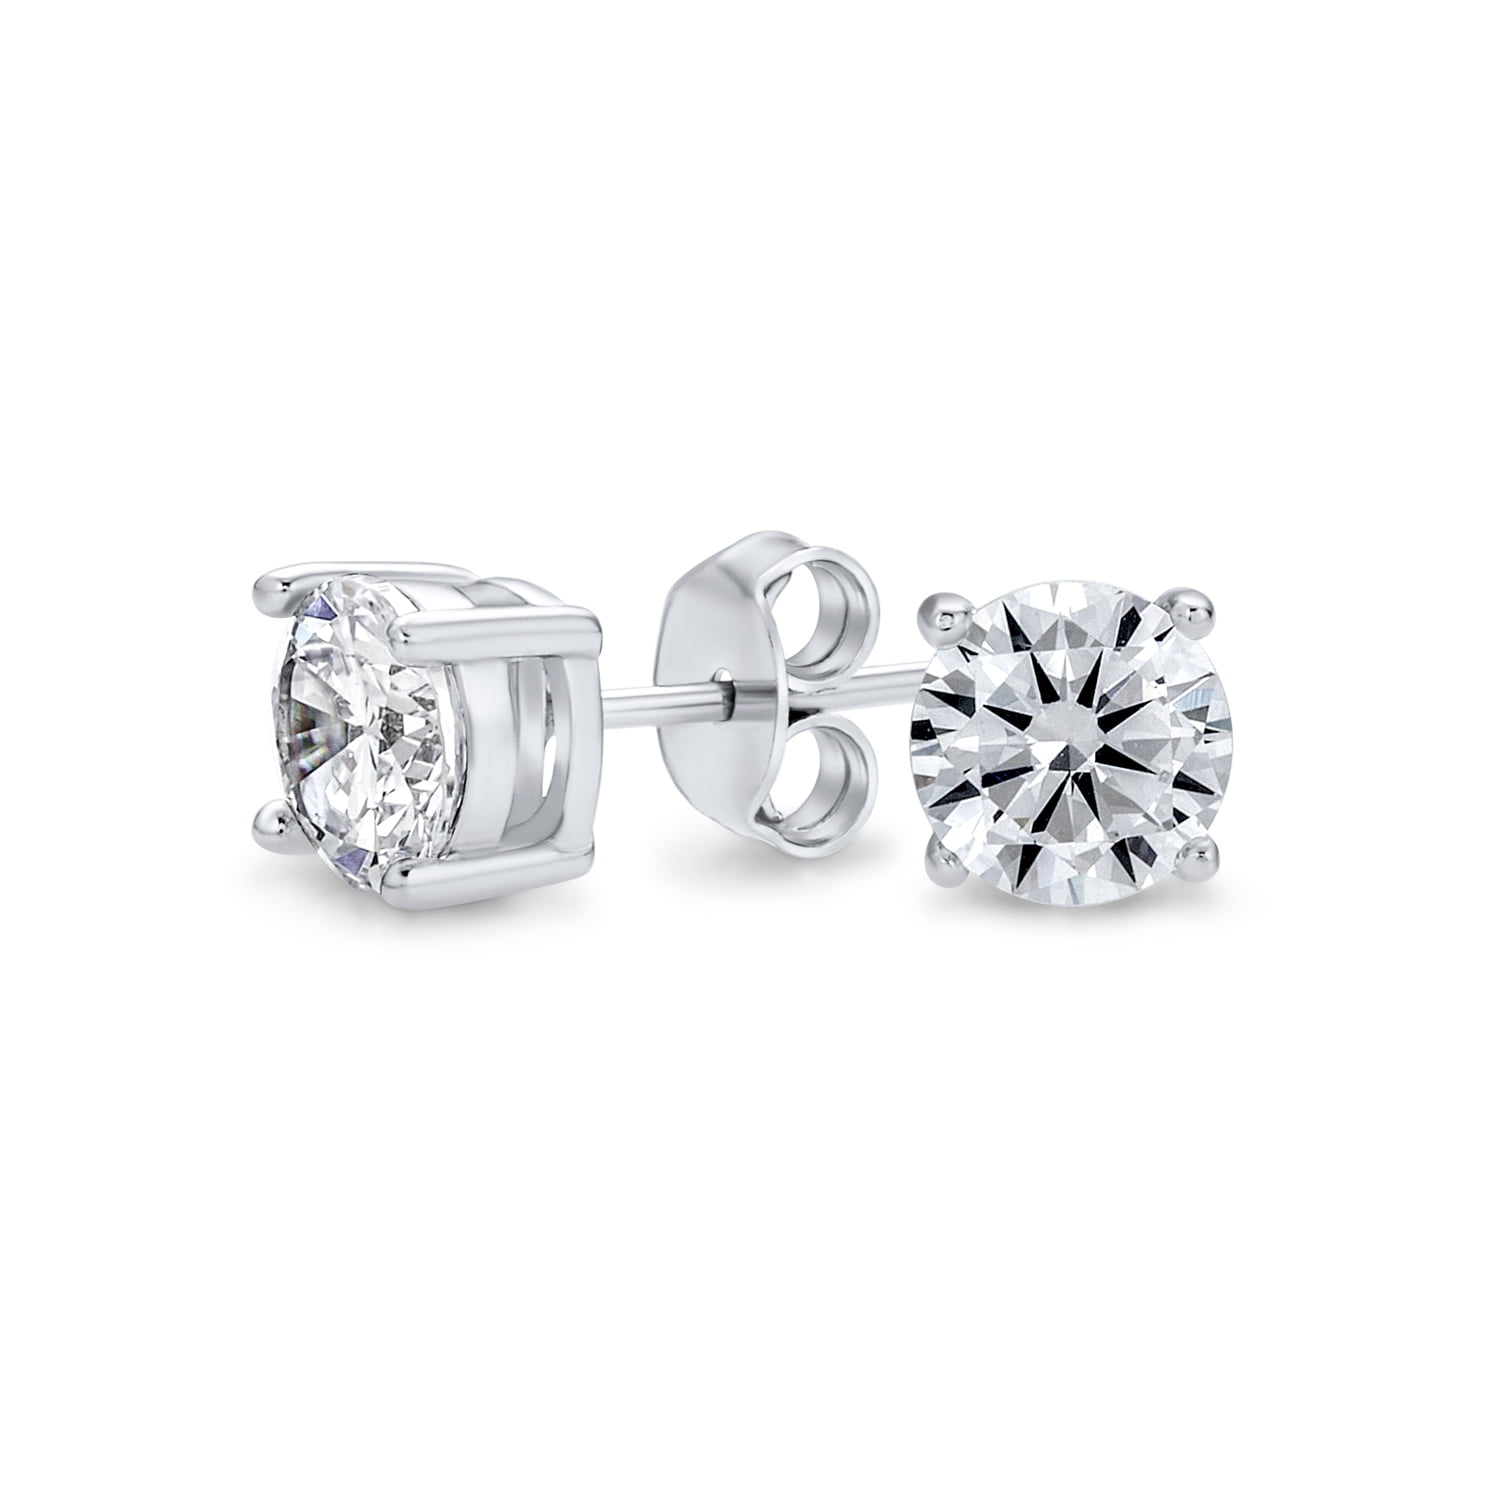 14k Gold Mens Round Diamond Simulant CZ Stud Earrings 6-Prong 1/4-2cttw,Excellent Quality